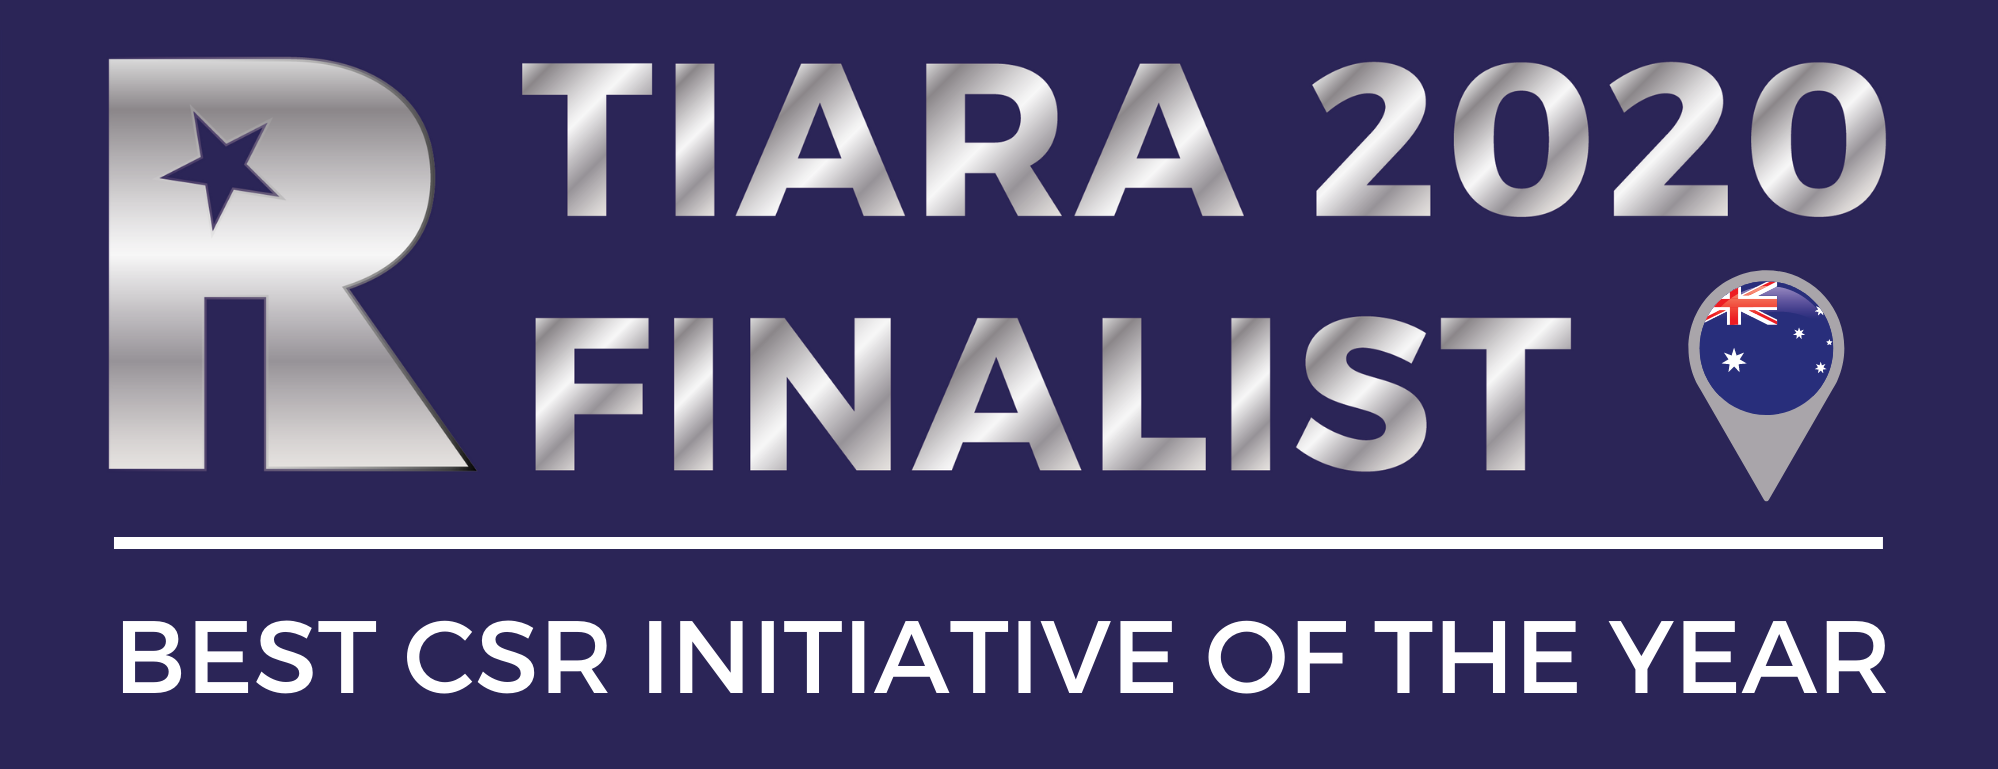 Finalist of the Tiara 2020 Best Corporate Social Responsibility (CSR) Initiative of the Year Awards.